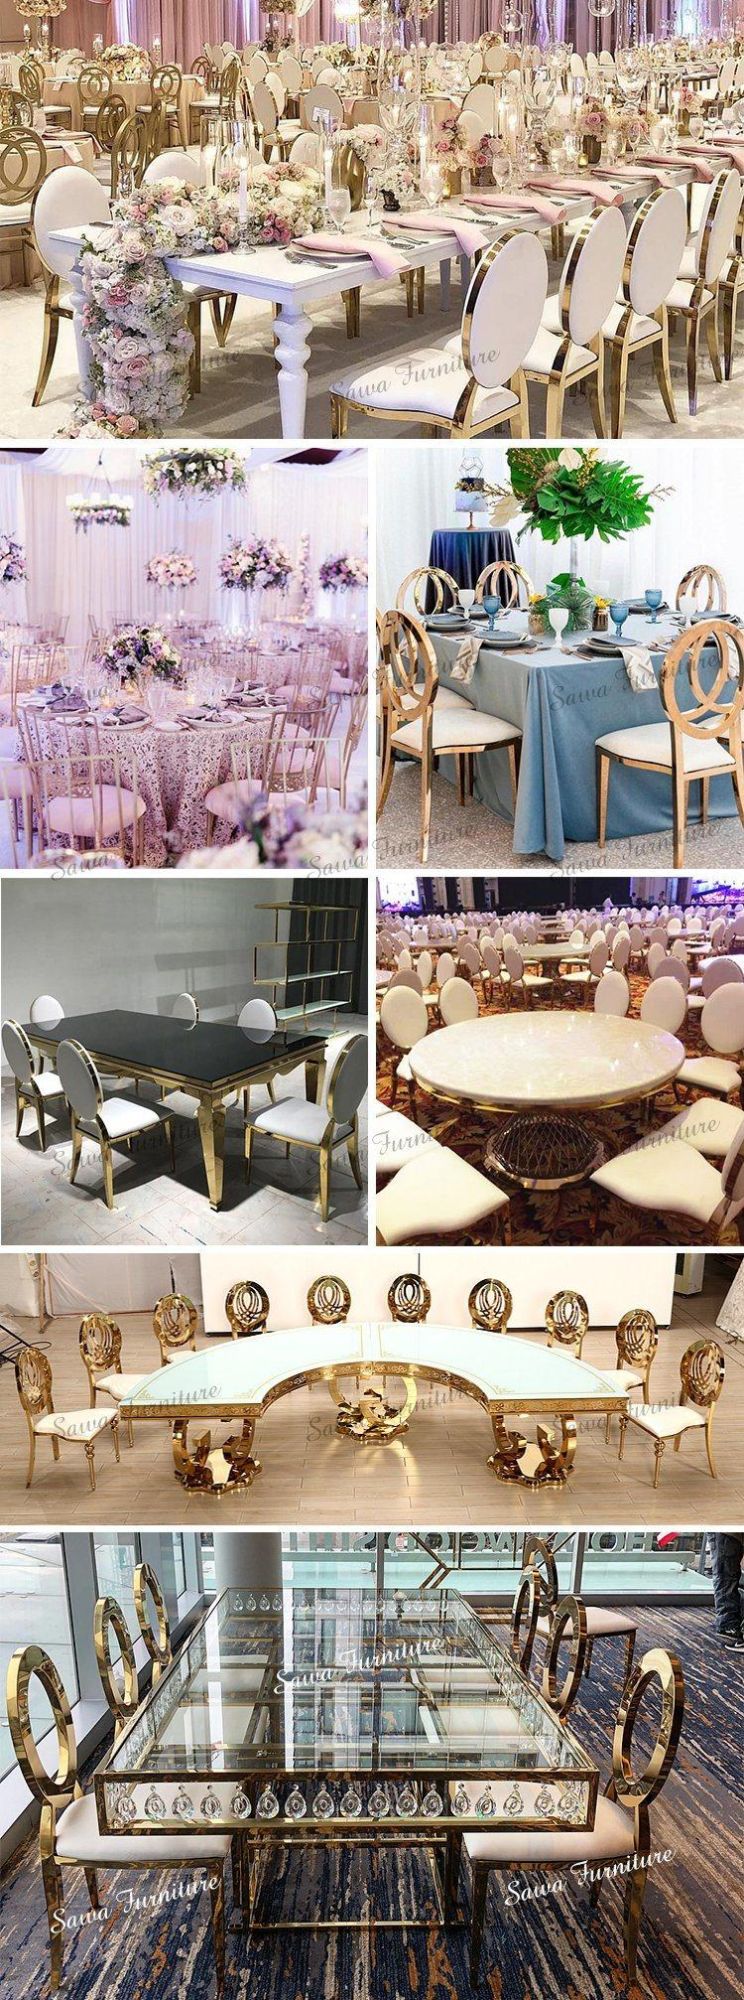 Wholesale PP Resin Chiavari Chair Tiffany Chairs for Wedding and Event Dining